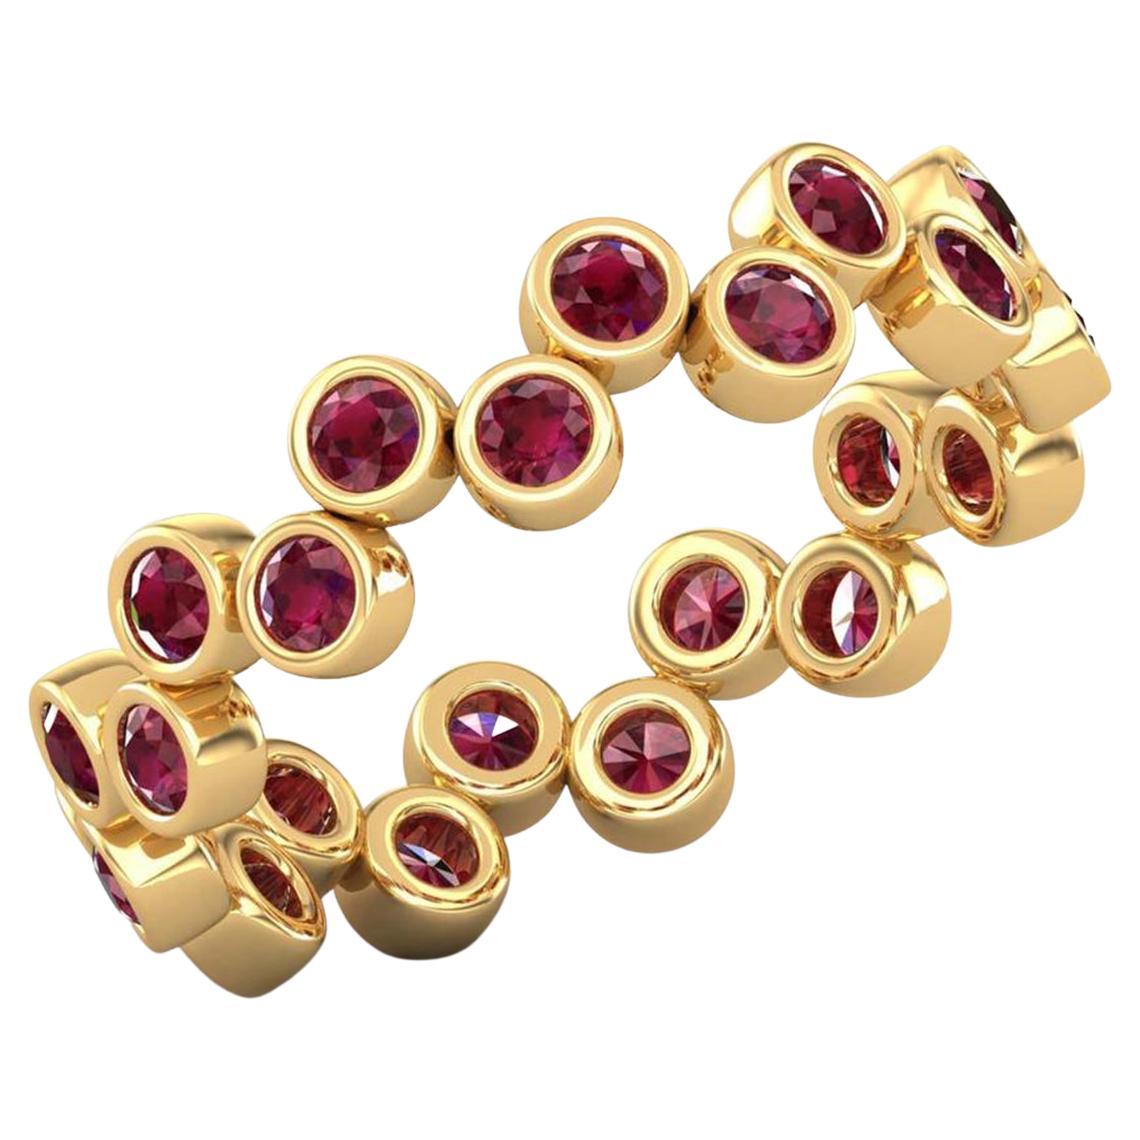 14 Karat Gold Round Cut Ruby Ring / Gold Engagement Ring / Ring for Her For Sale